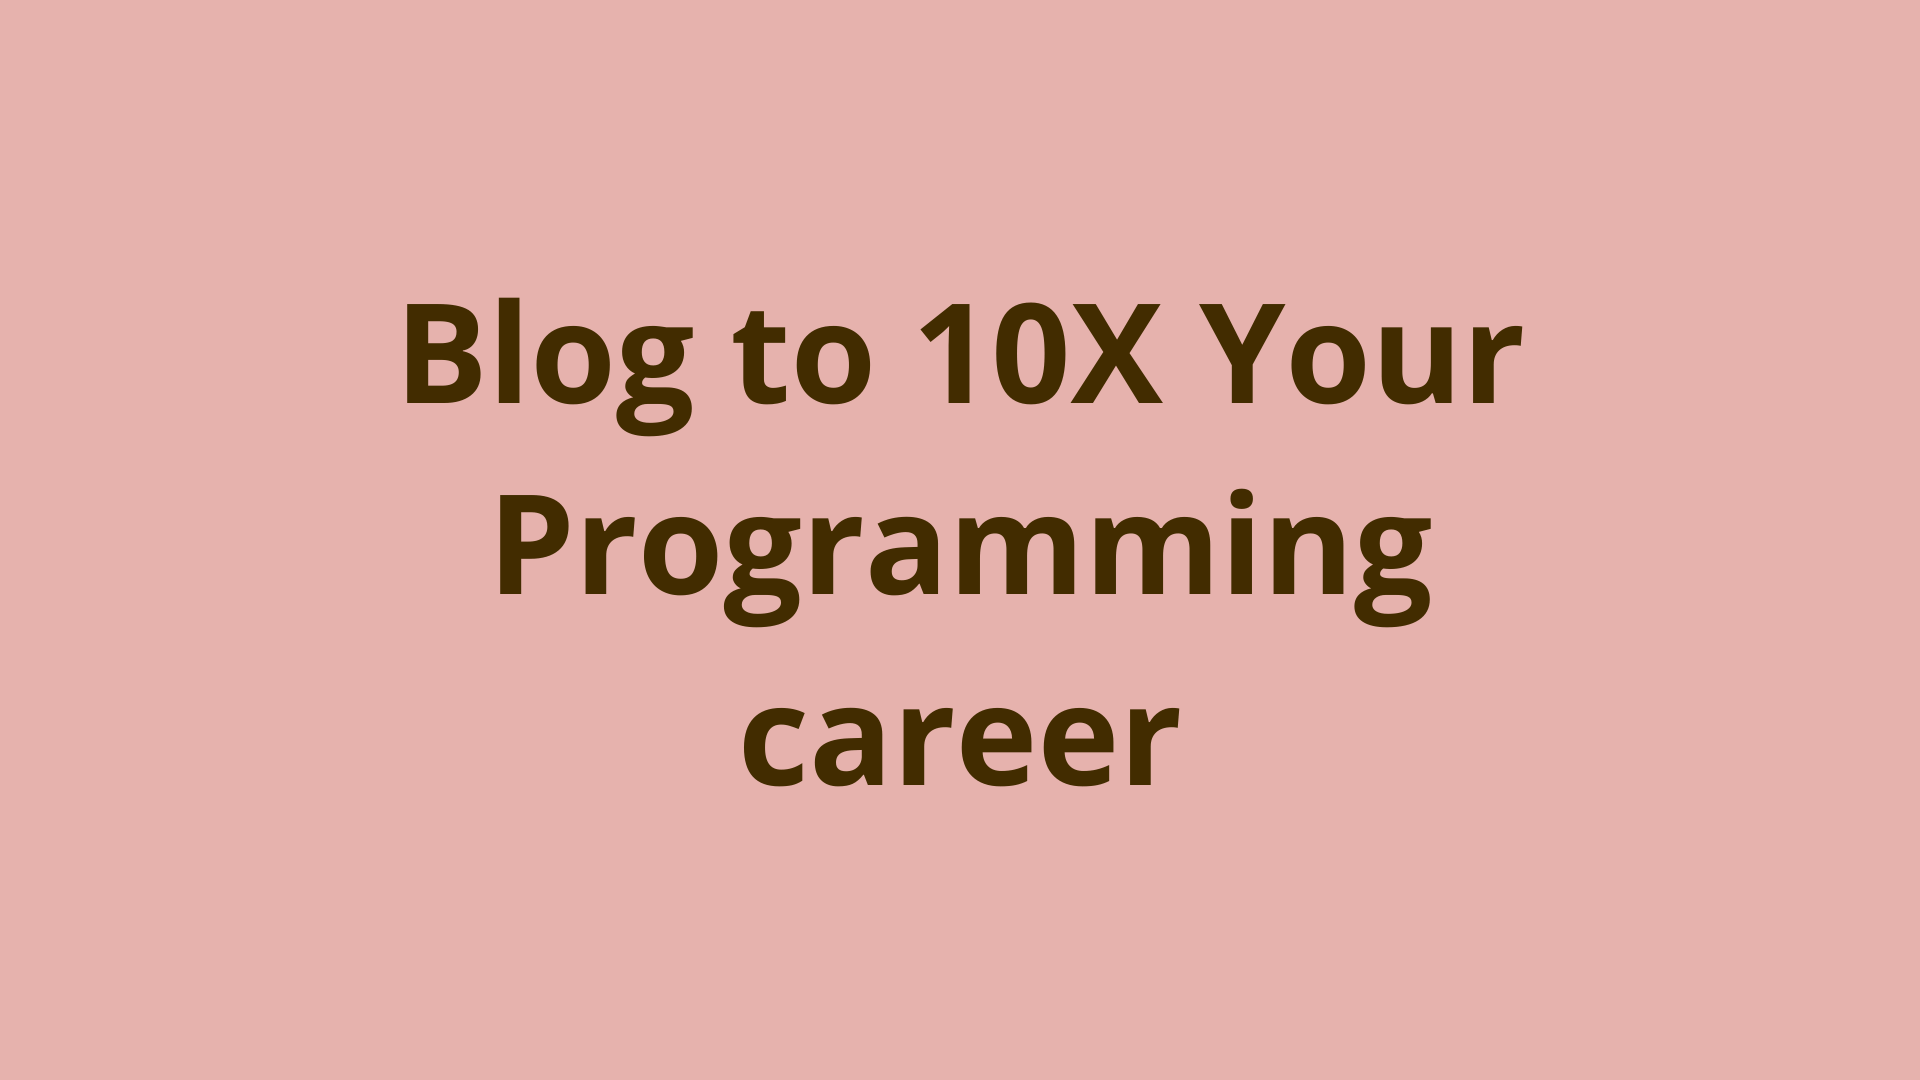 Image of Blog to 10X your programming career